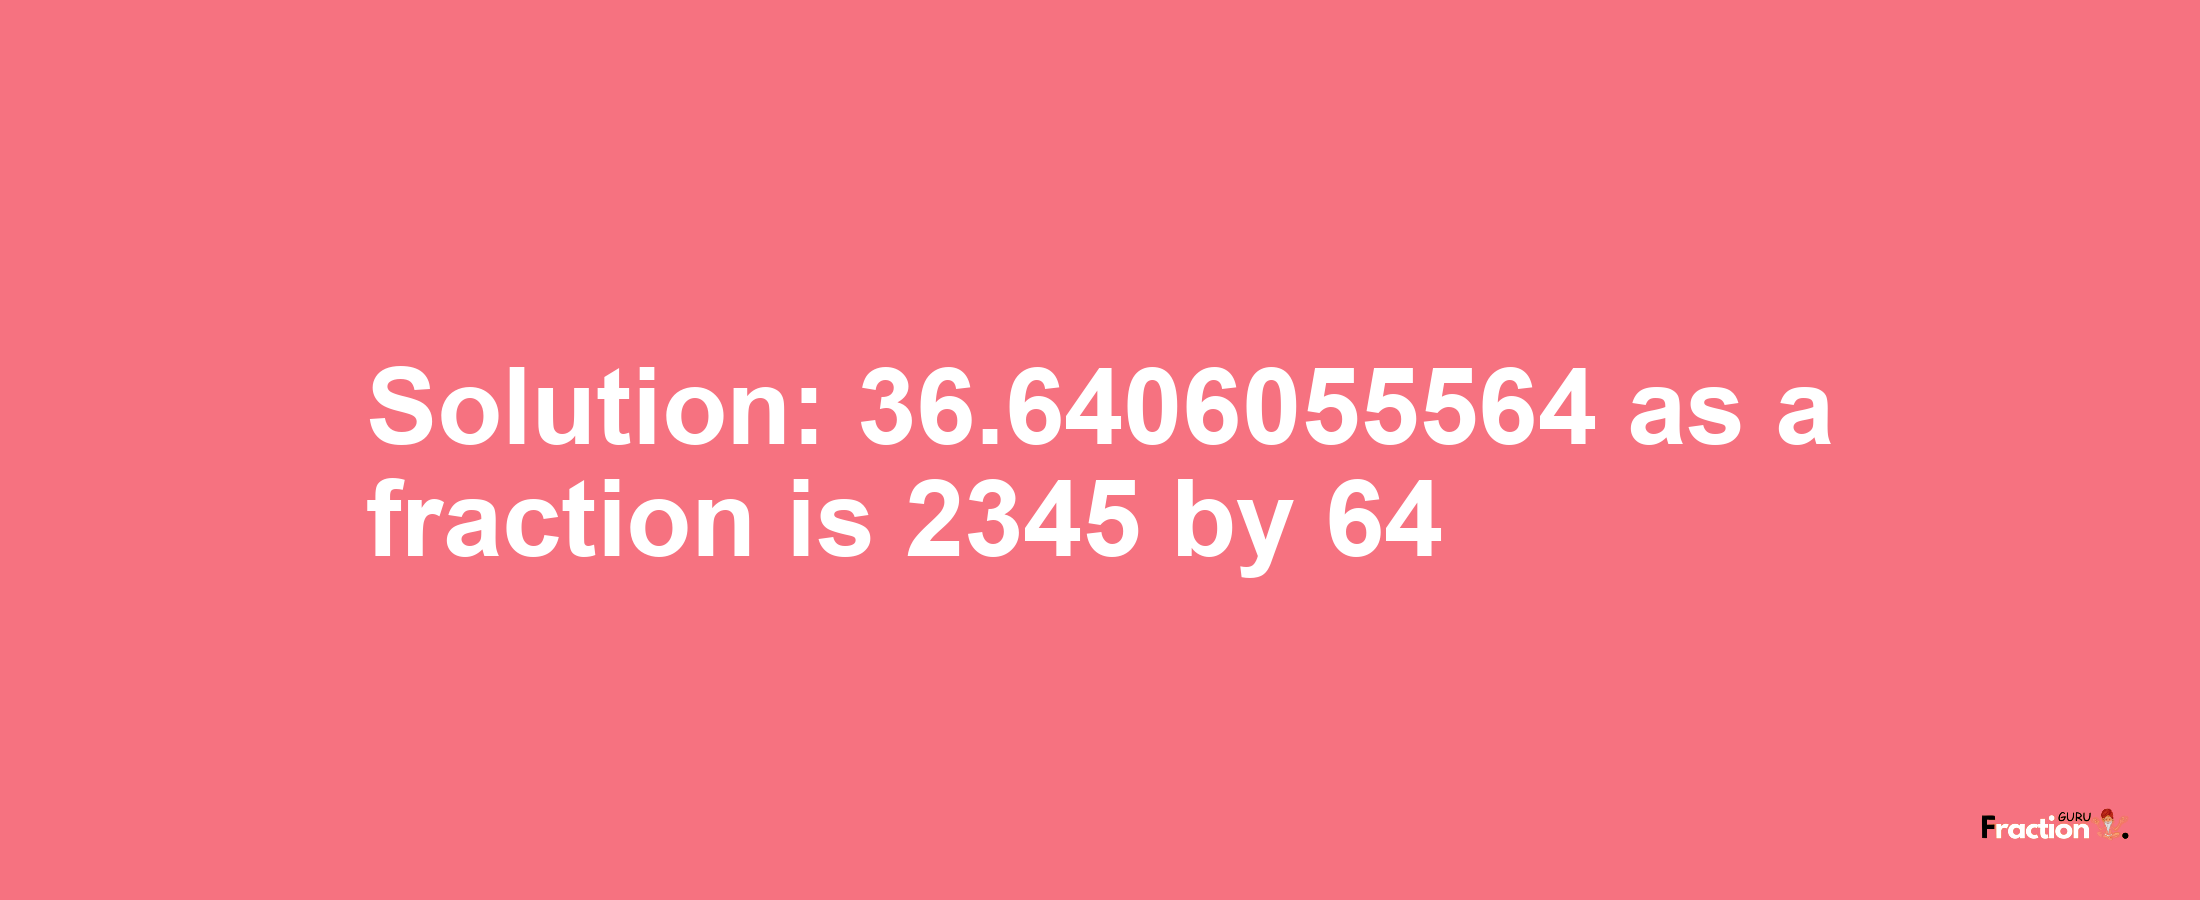 Solution:36.6406055564 as a fraction is 2345/64